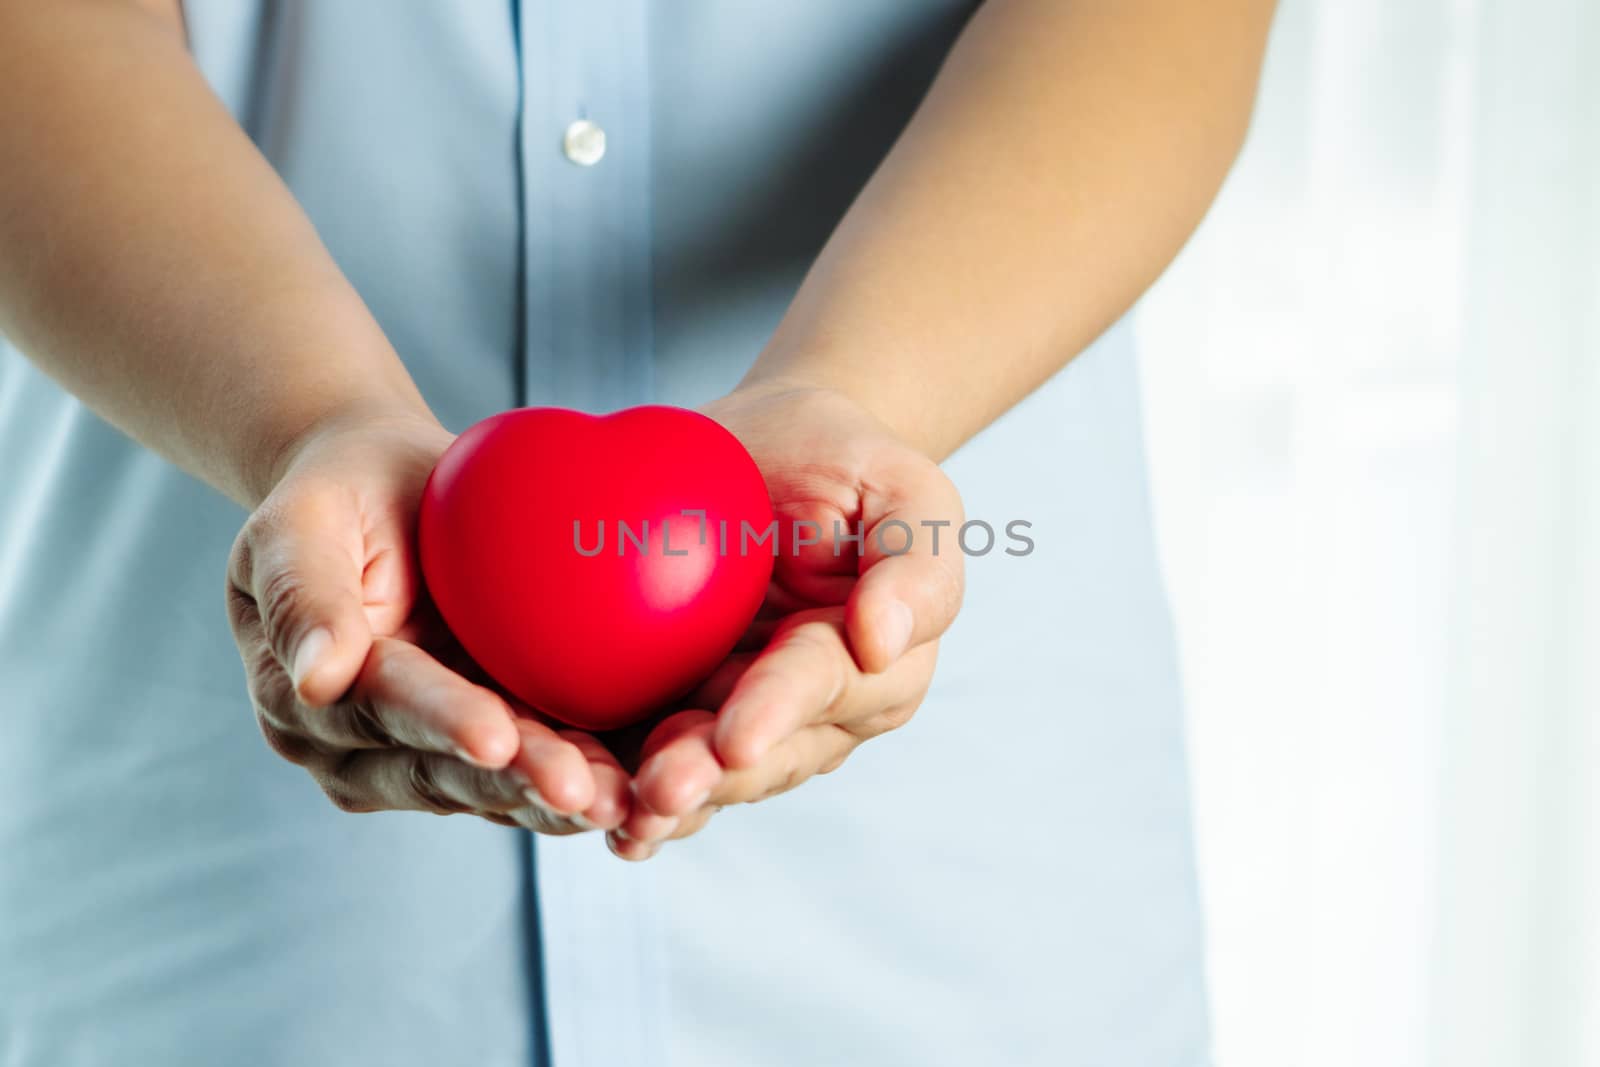 woman holding red heart on hand, Blood donation concept by psodaz